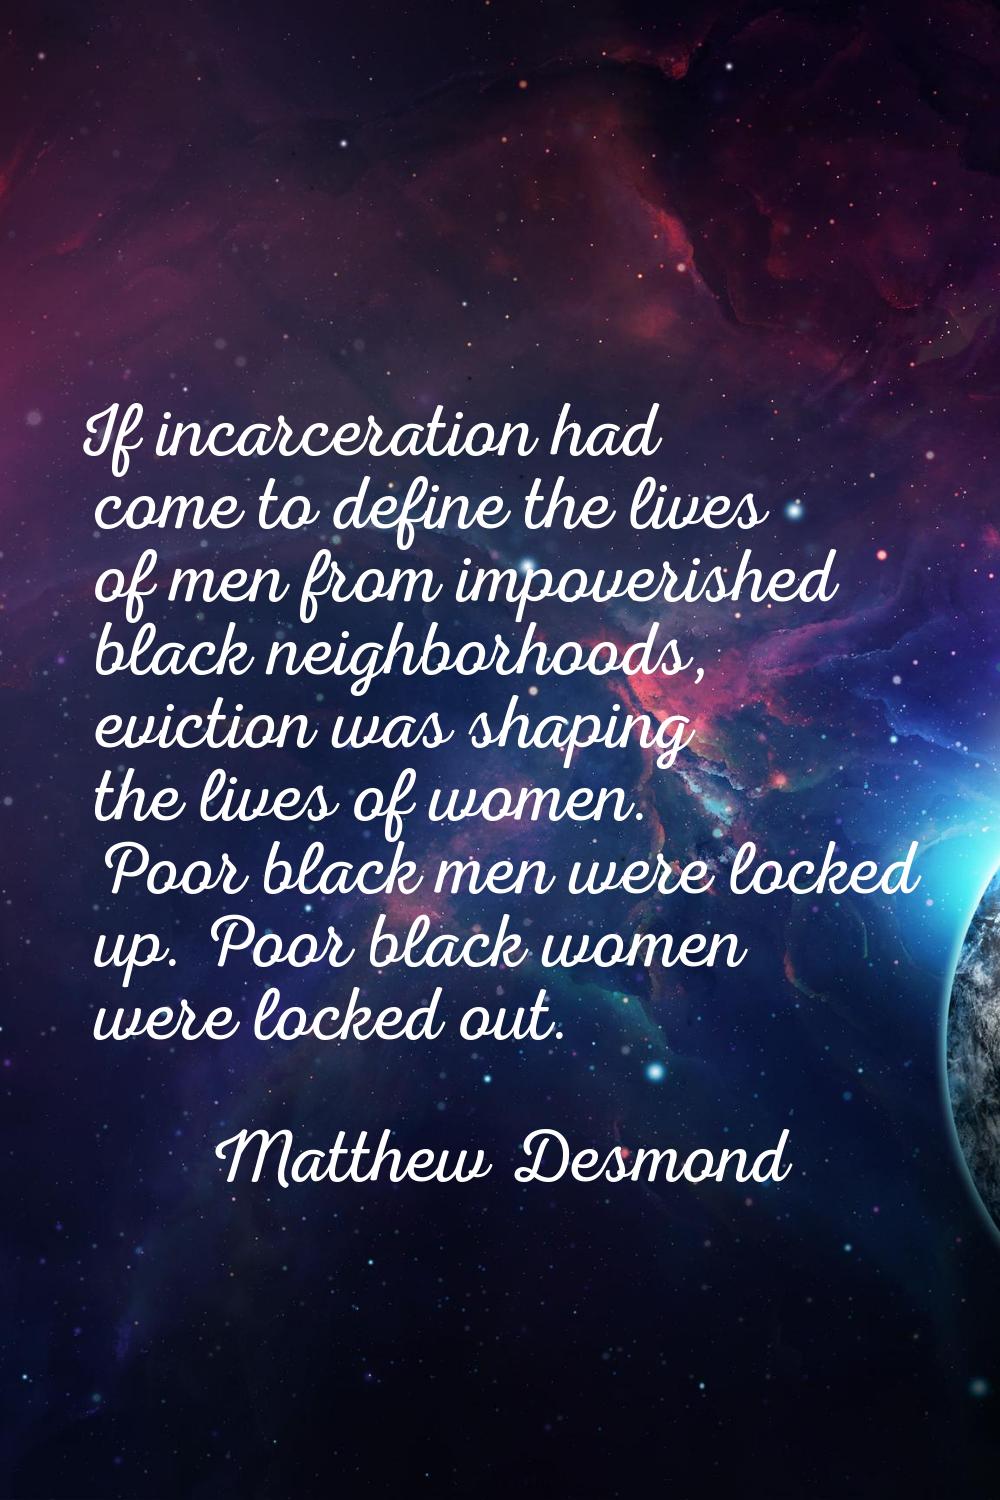 If incarceration had come to define the lives of men from impoverished black neighborhoods, evictio